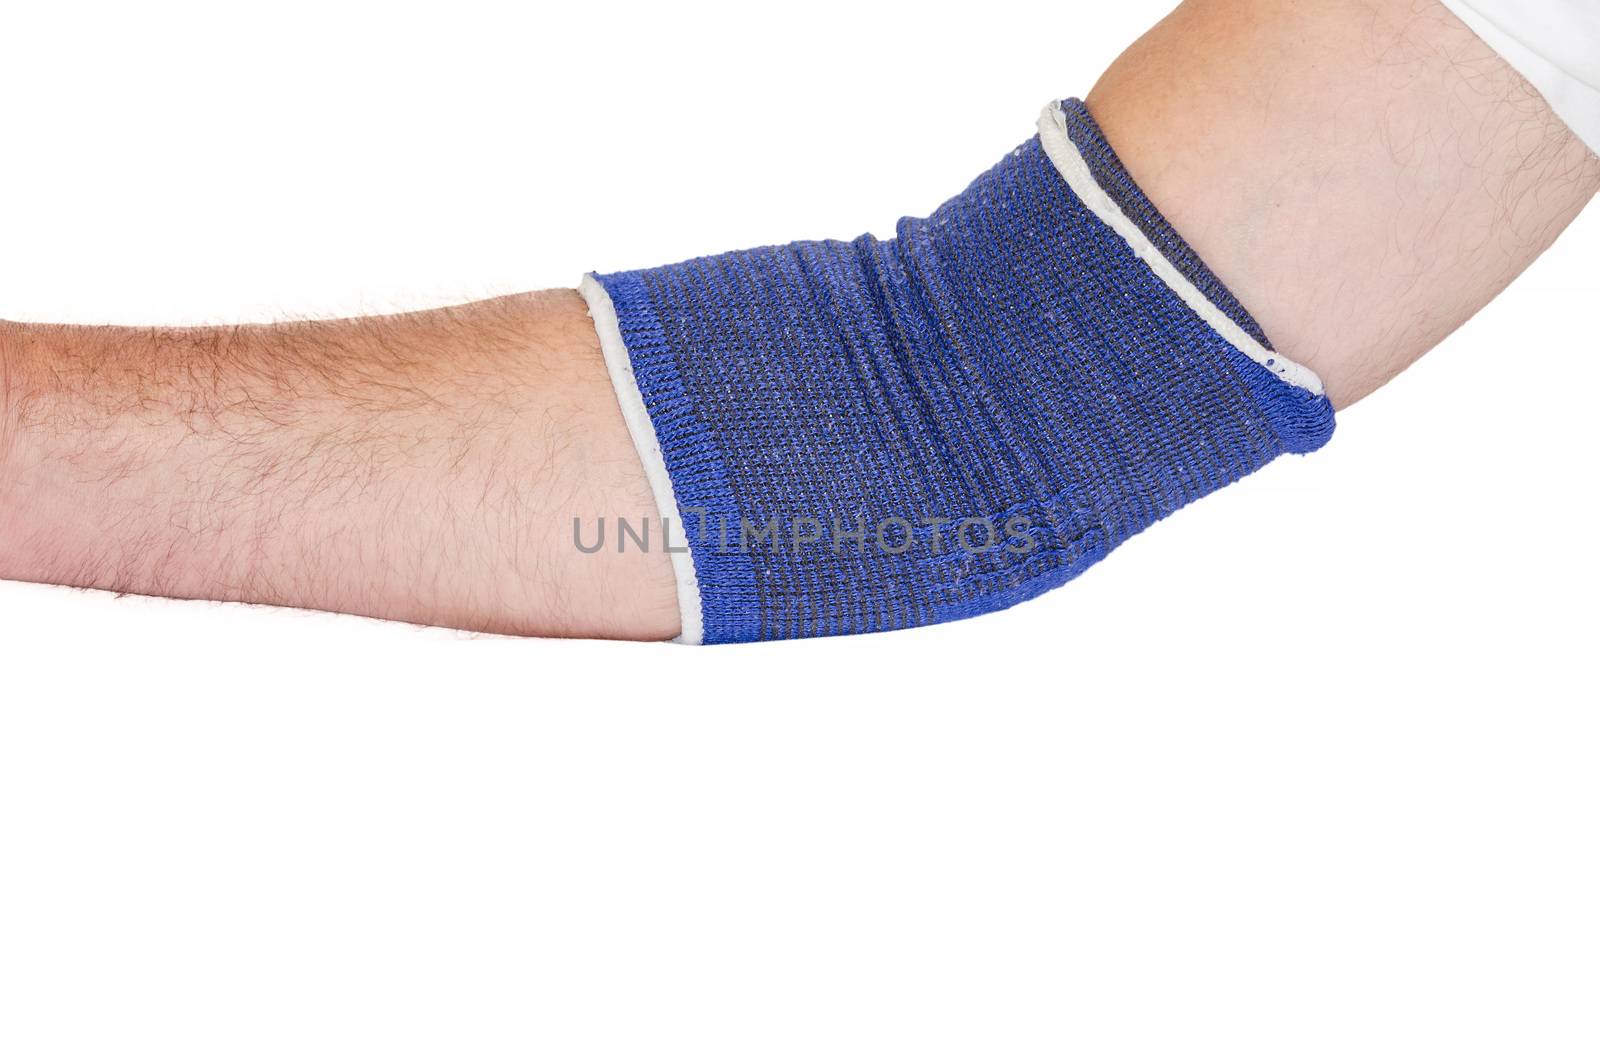 Tennis elbow with blue bandage by JFsPic